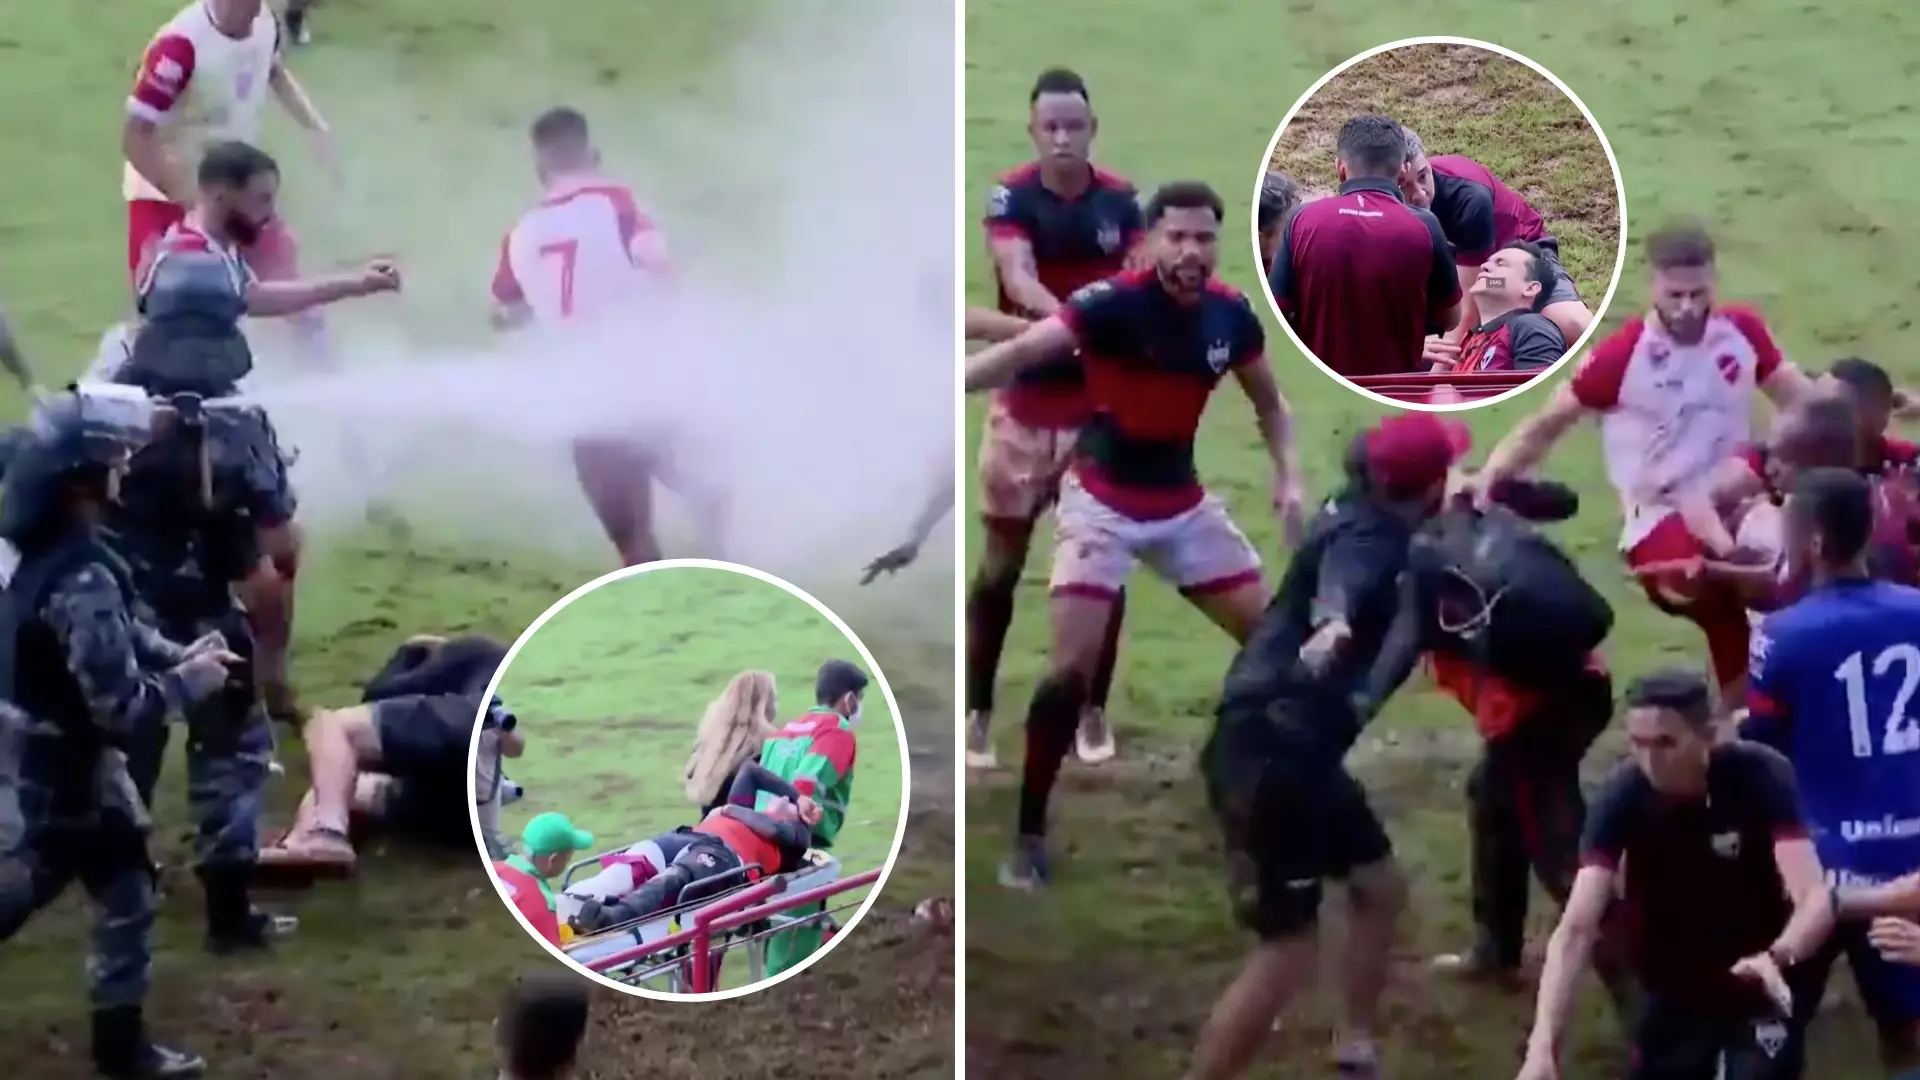 Massive Brawl Breaks Out Between Local Rivals In Brazil With Riot Police Using Pepper Spray